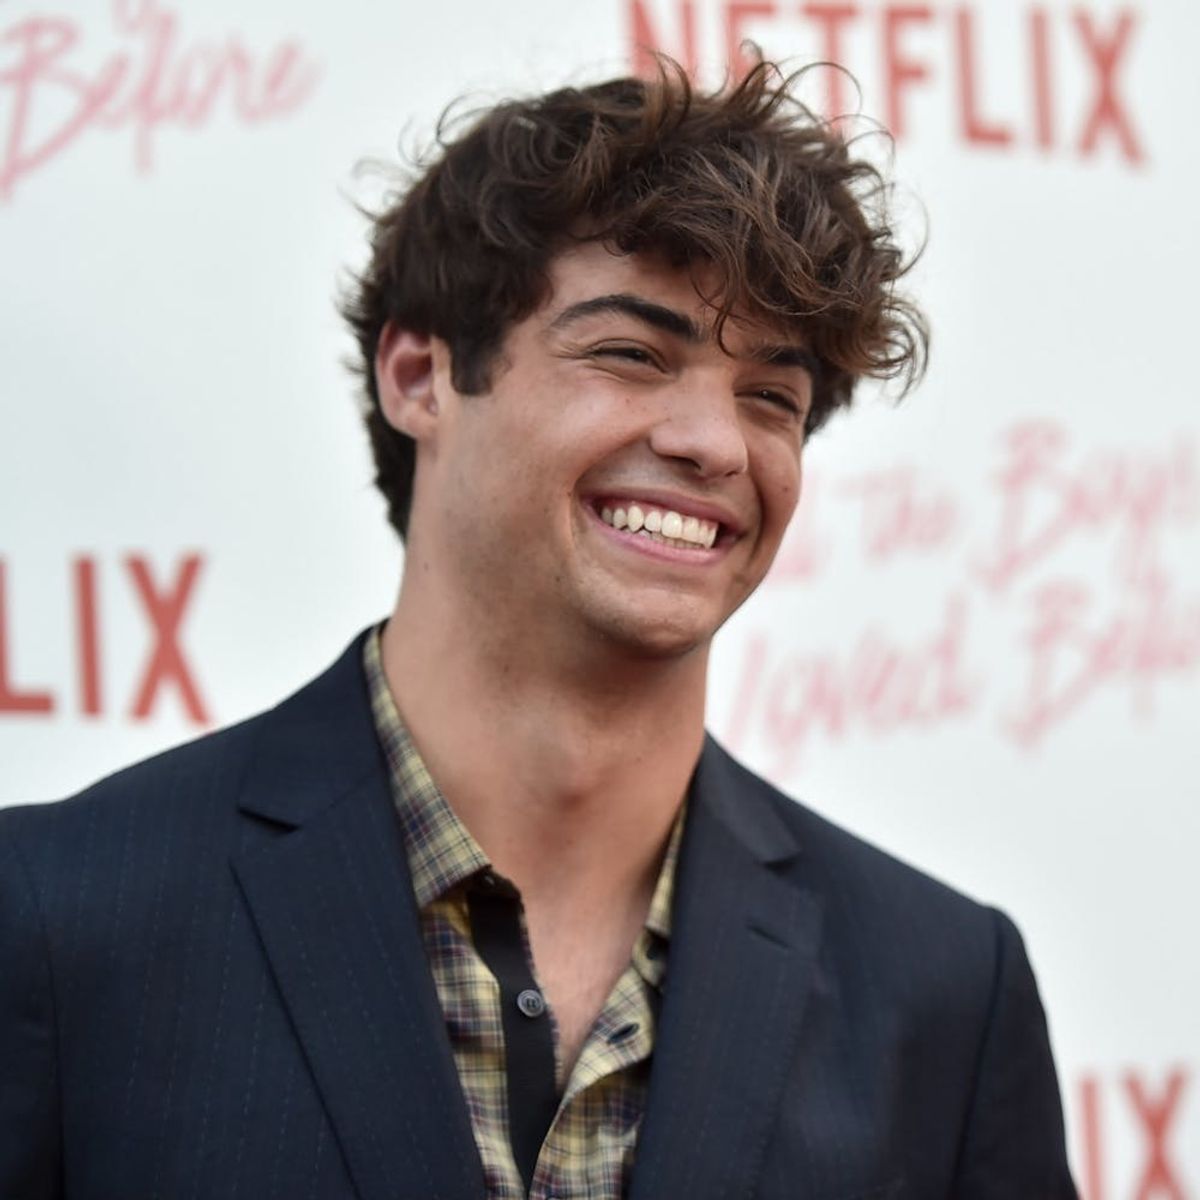 Noah Centineo Explains His ‘True Connection’ With ‘Sierra Burgess Is a Loser’ Costar Shannon Purser